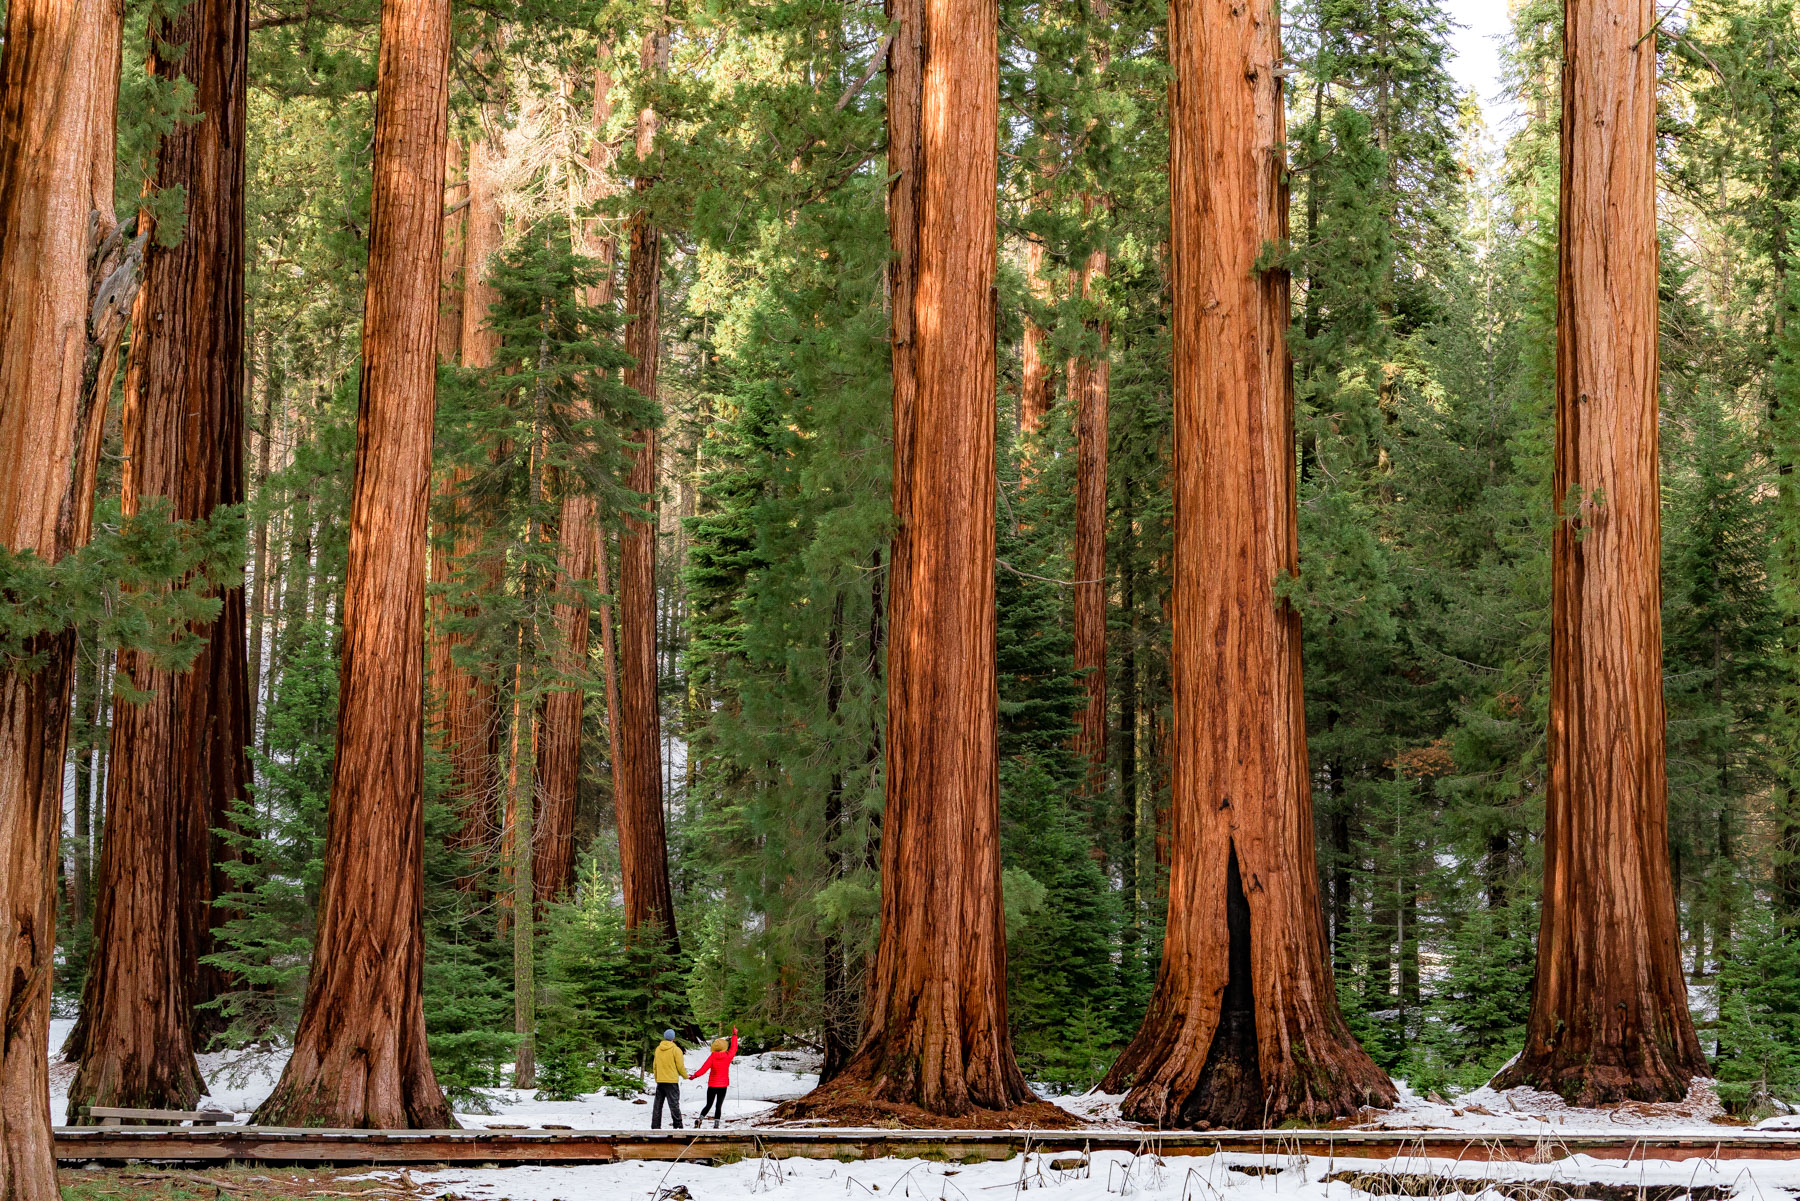 10+ (GIANT) Sequoia Tree & Kings Canyon National Parks Facts You Probably Didn’t Know